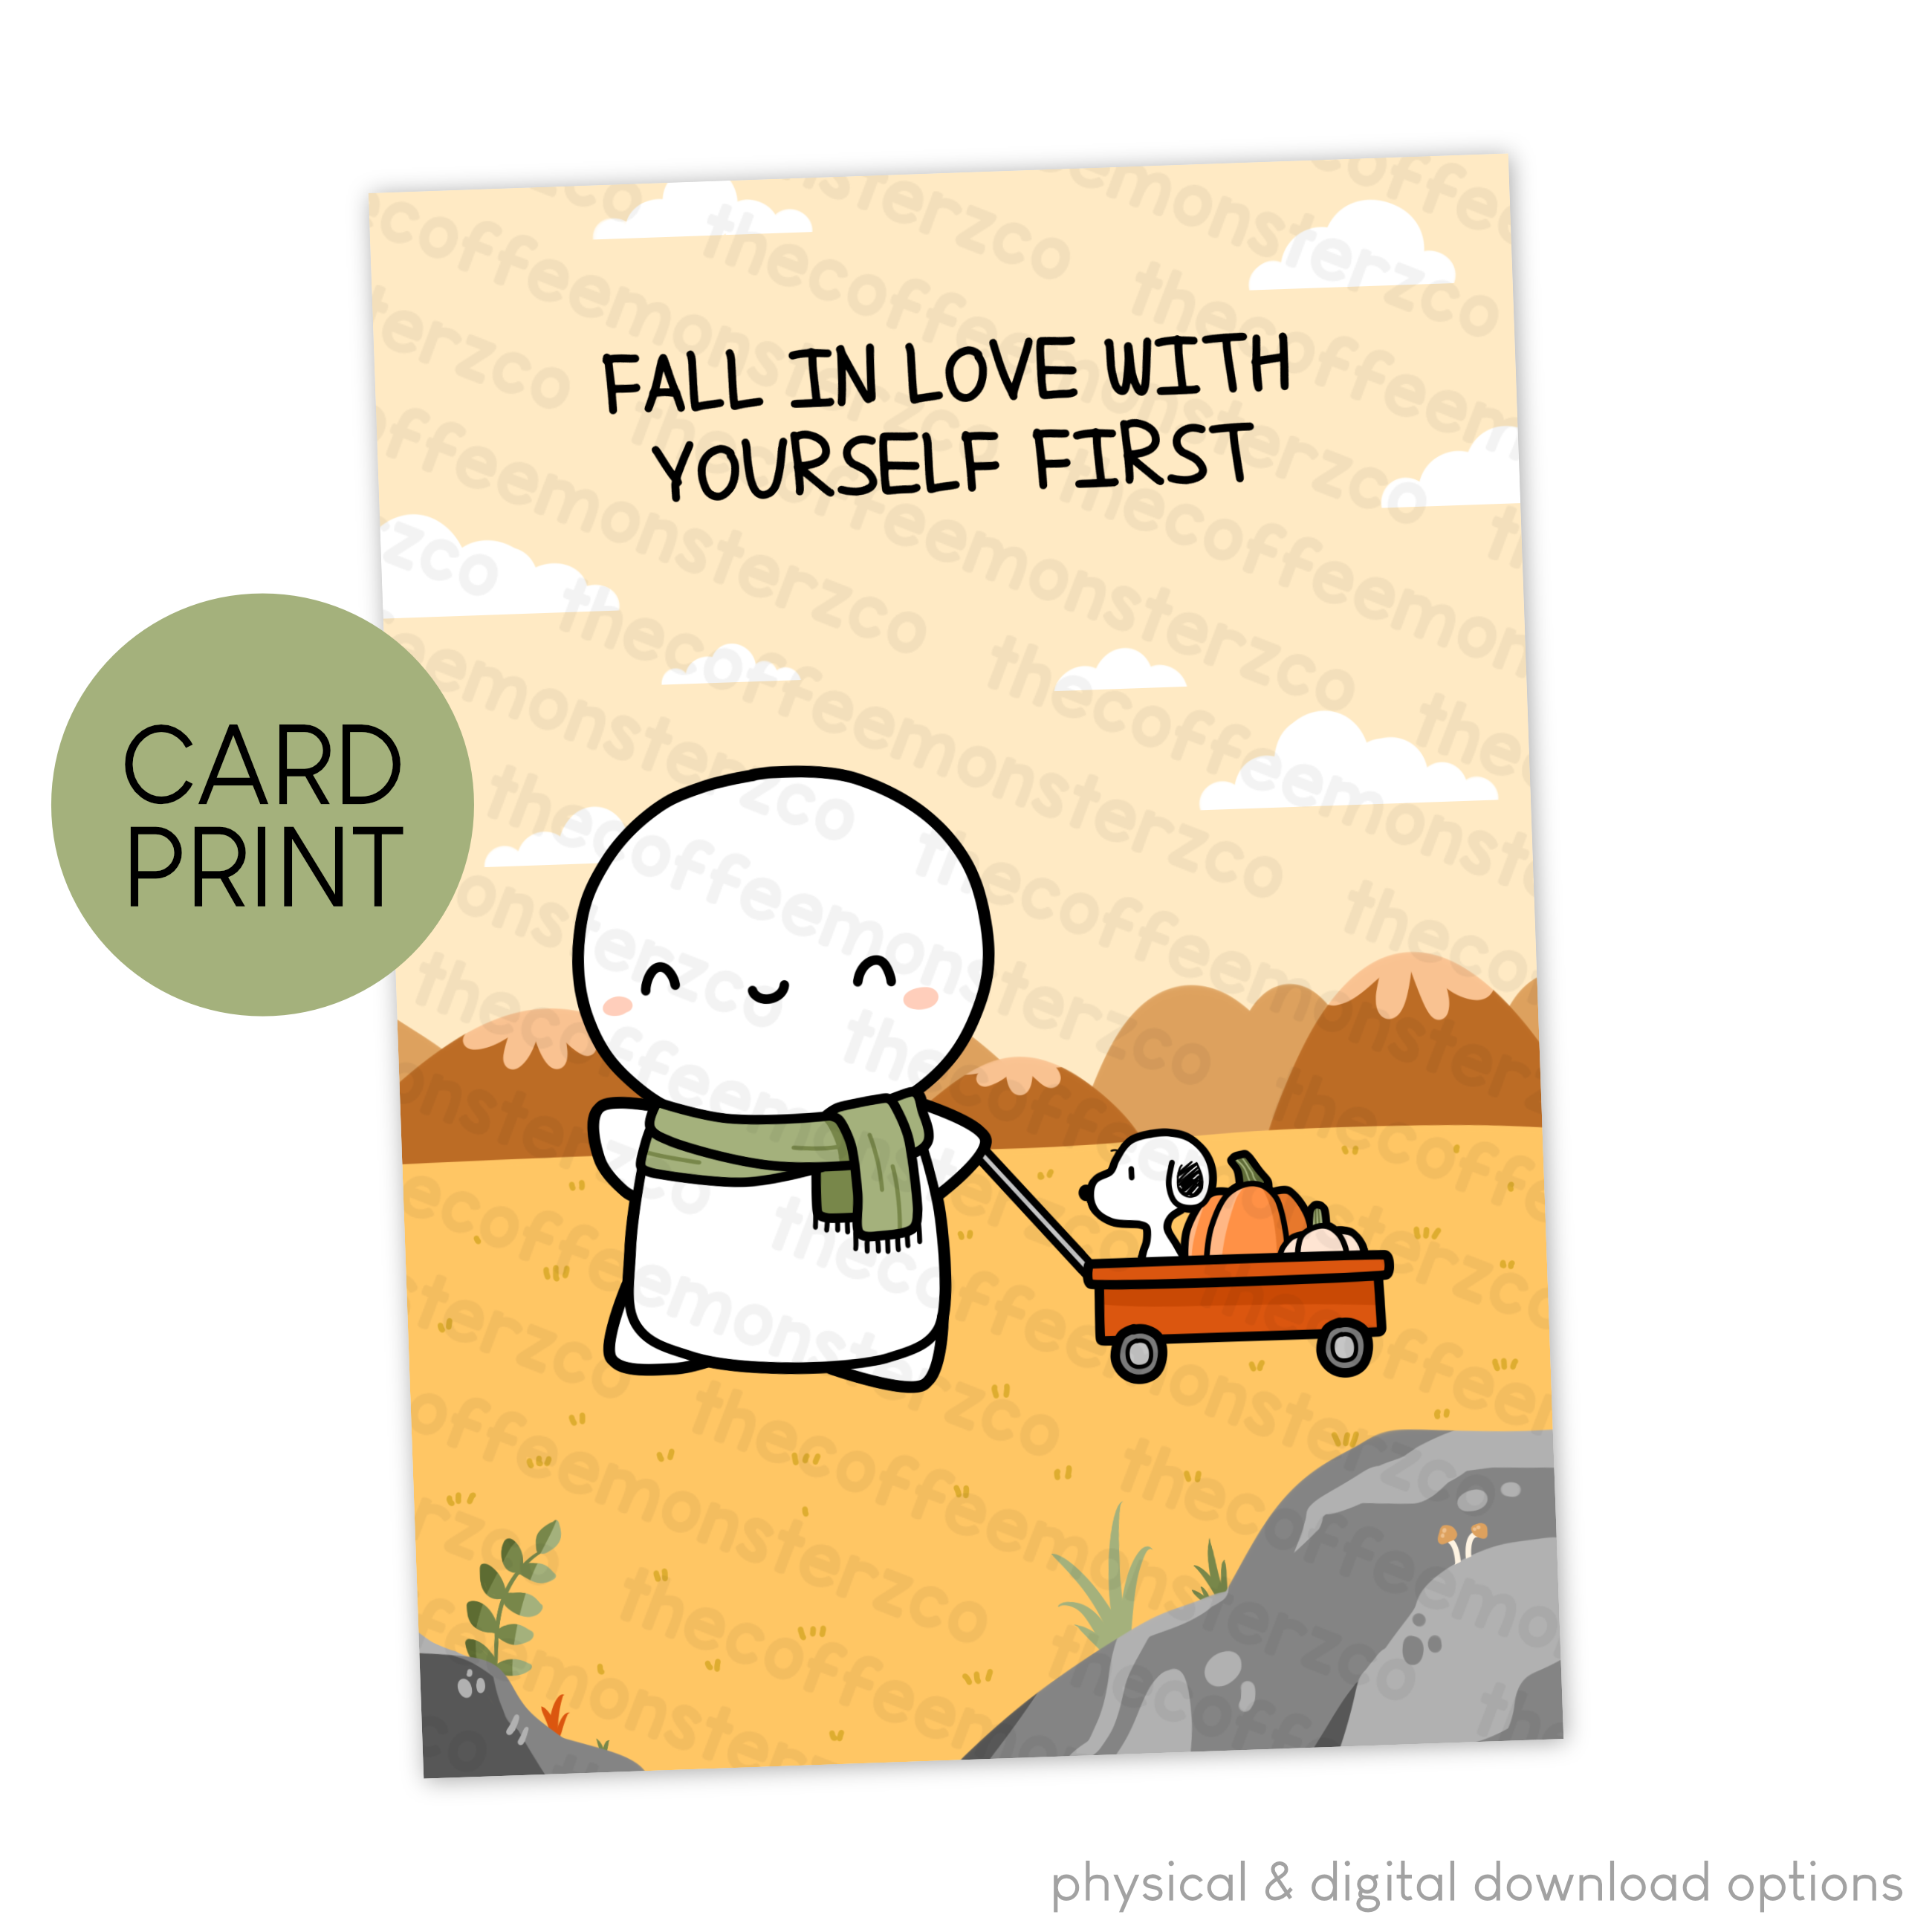 Fall In Love With Yourself First - Card Print